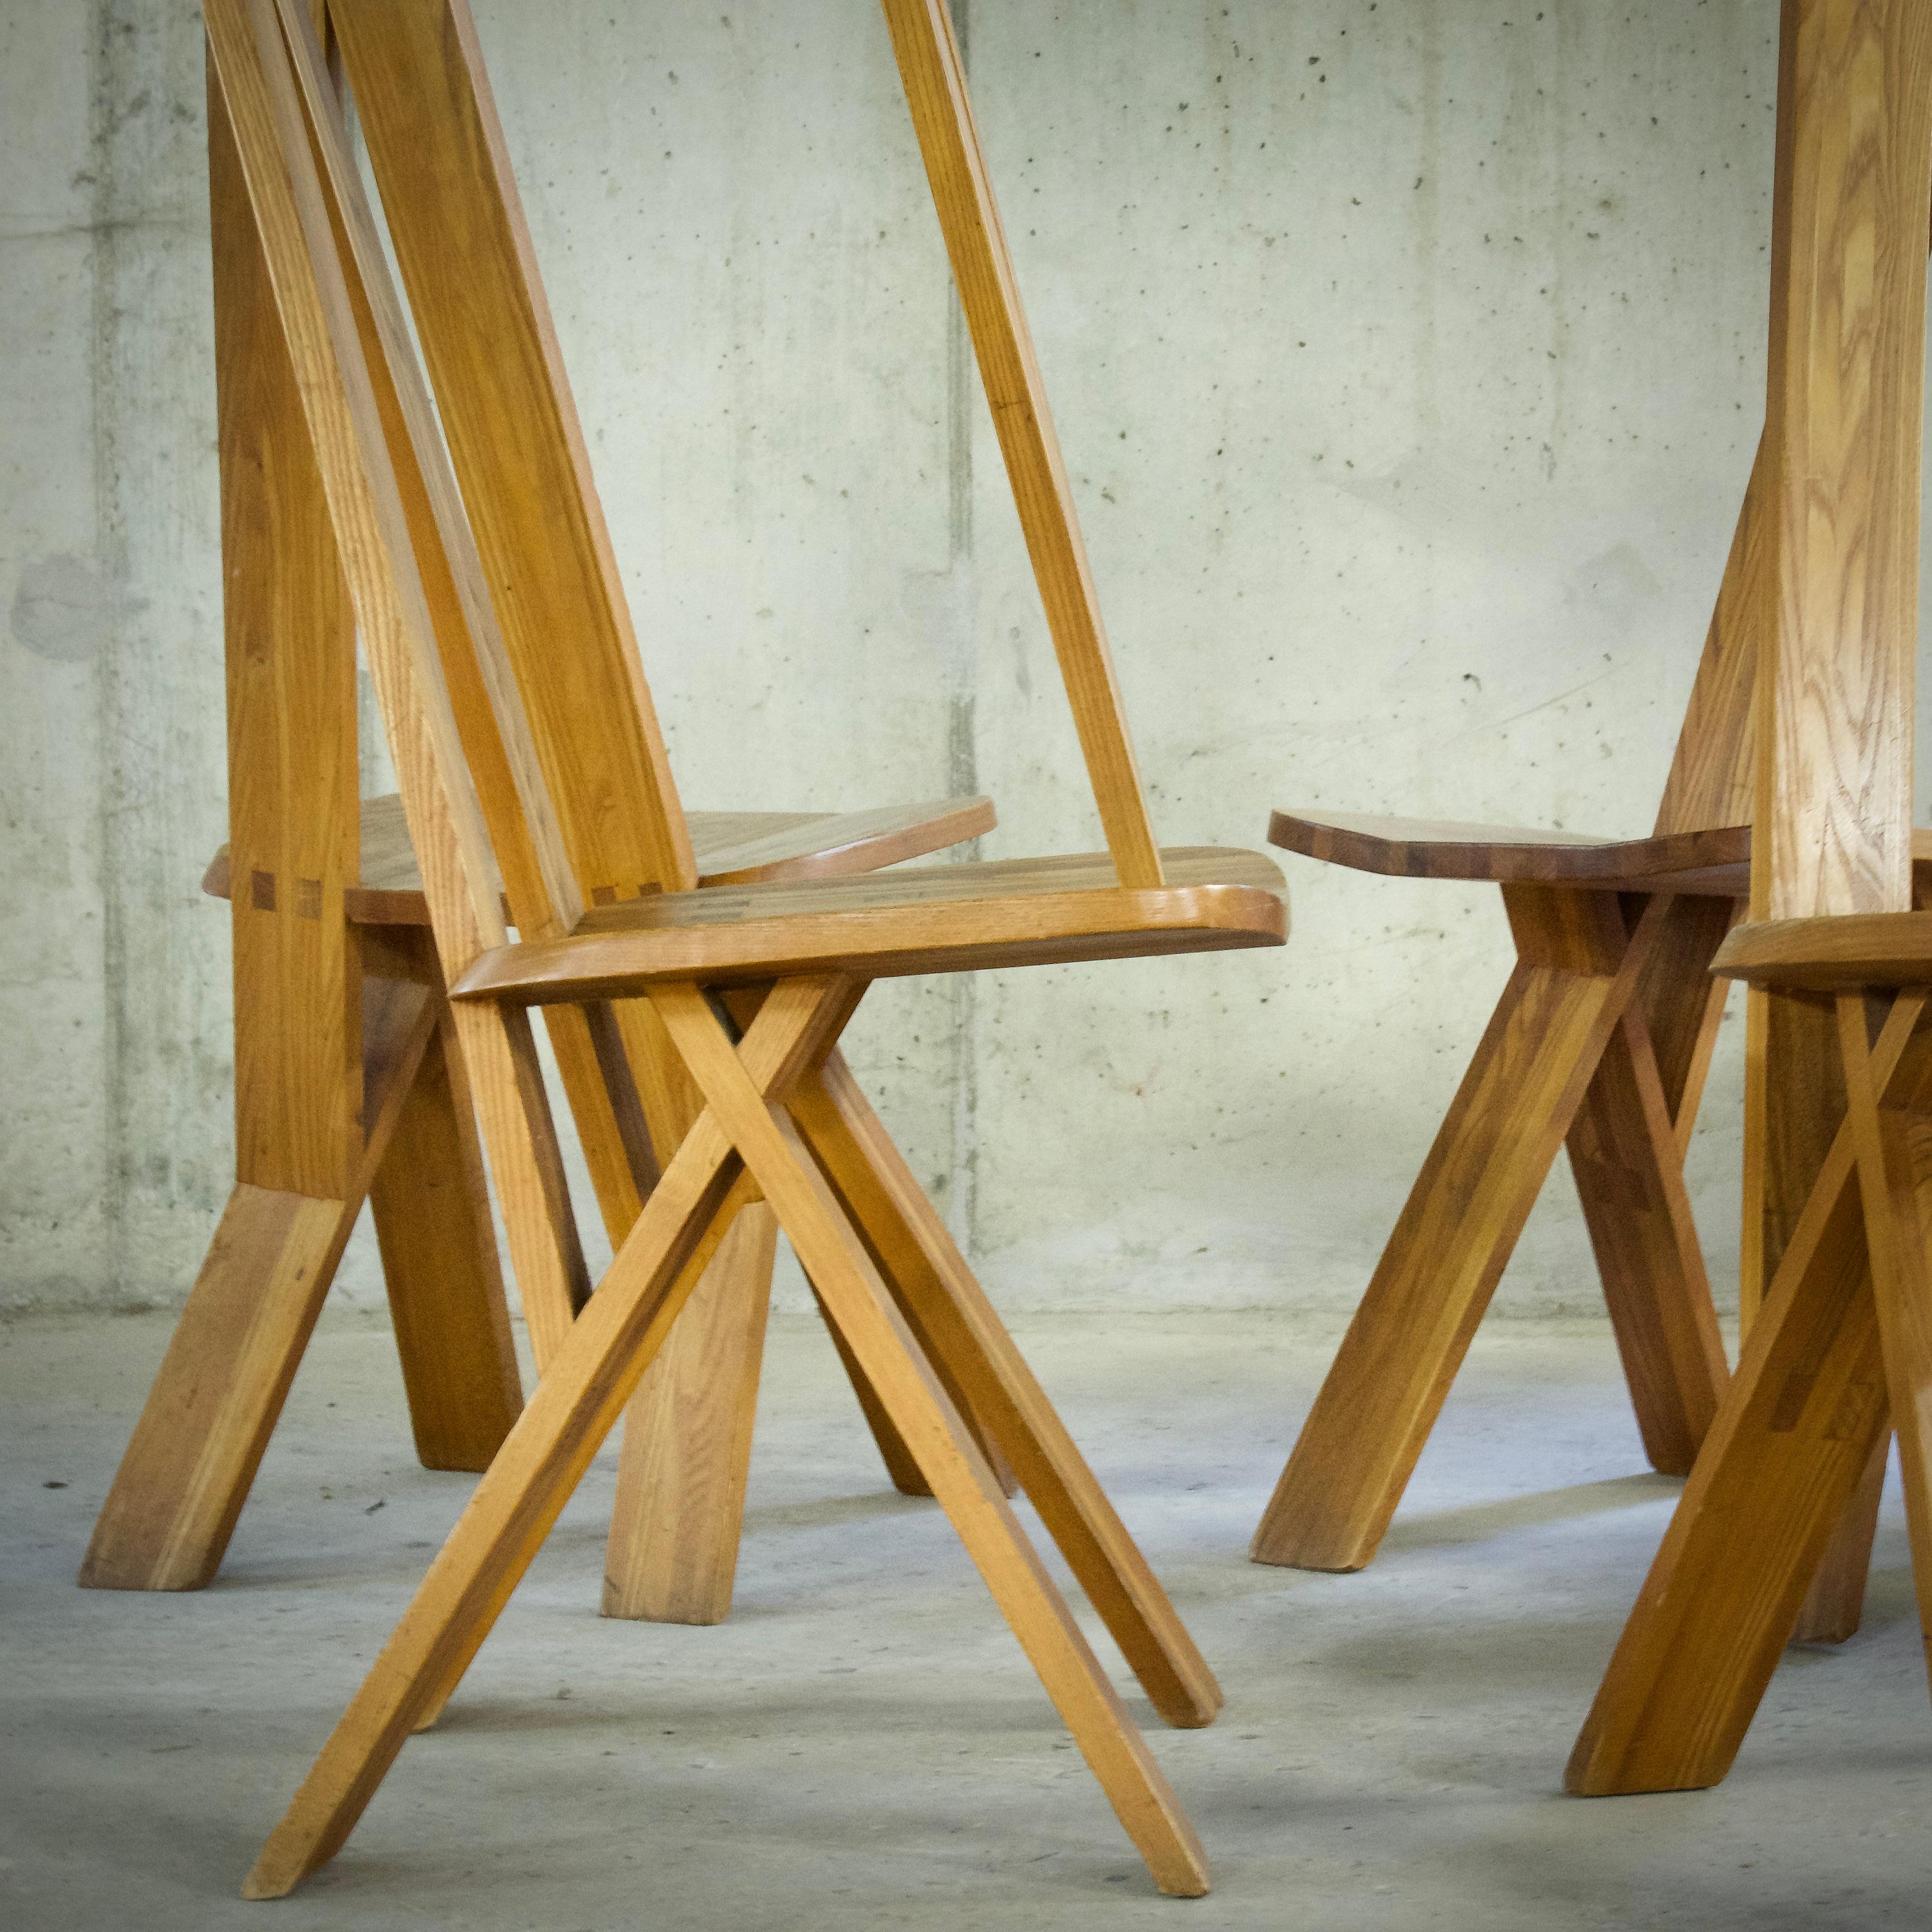 CHLACC ! Like the dry and satisfying sound of two pieces of wood coming together to perfection.

This name is in fact the name of the patented system allowing the manufacture of these chairs, understand 